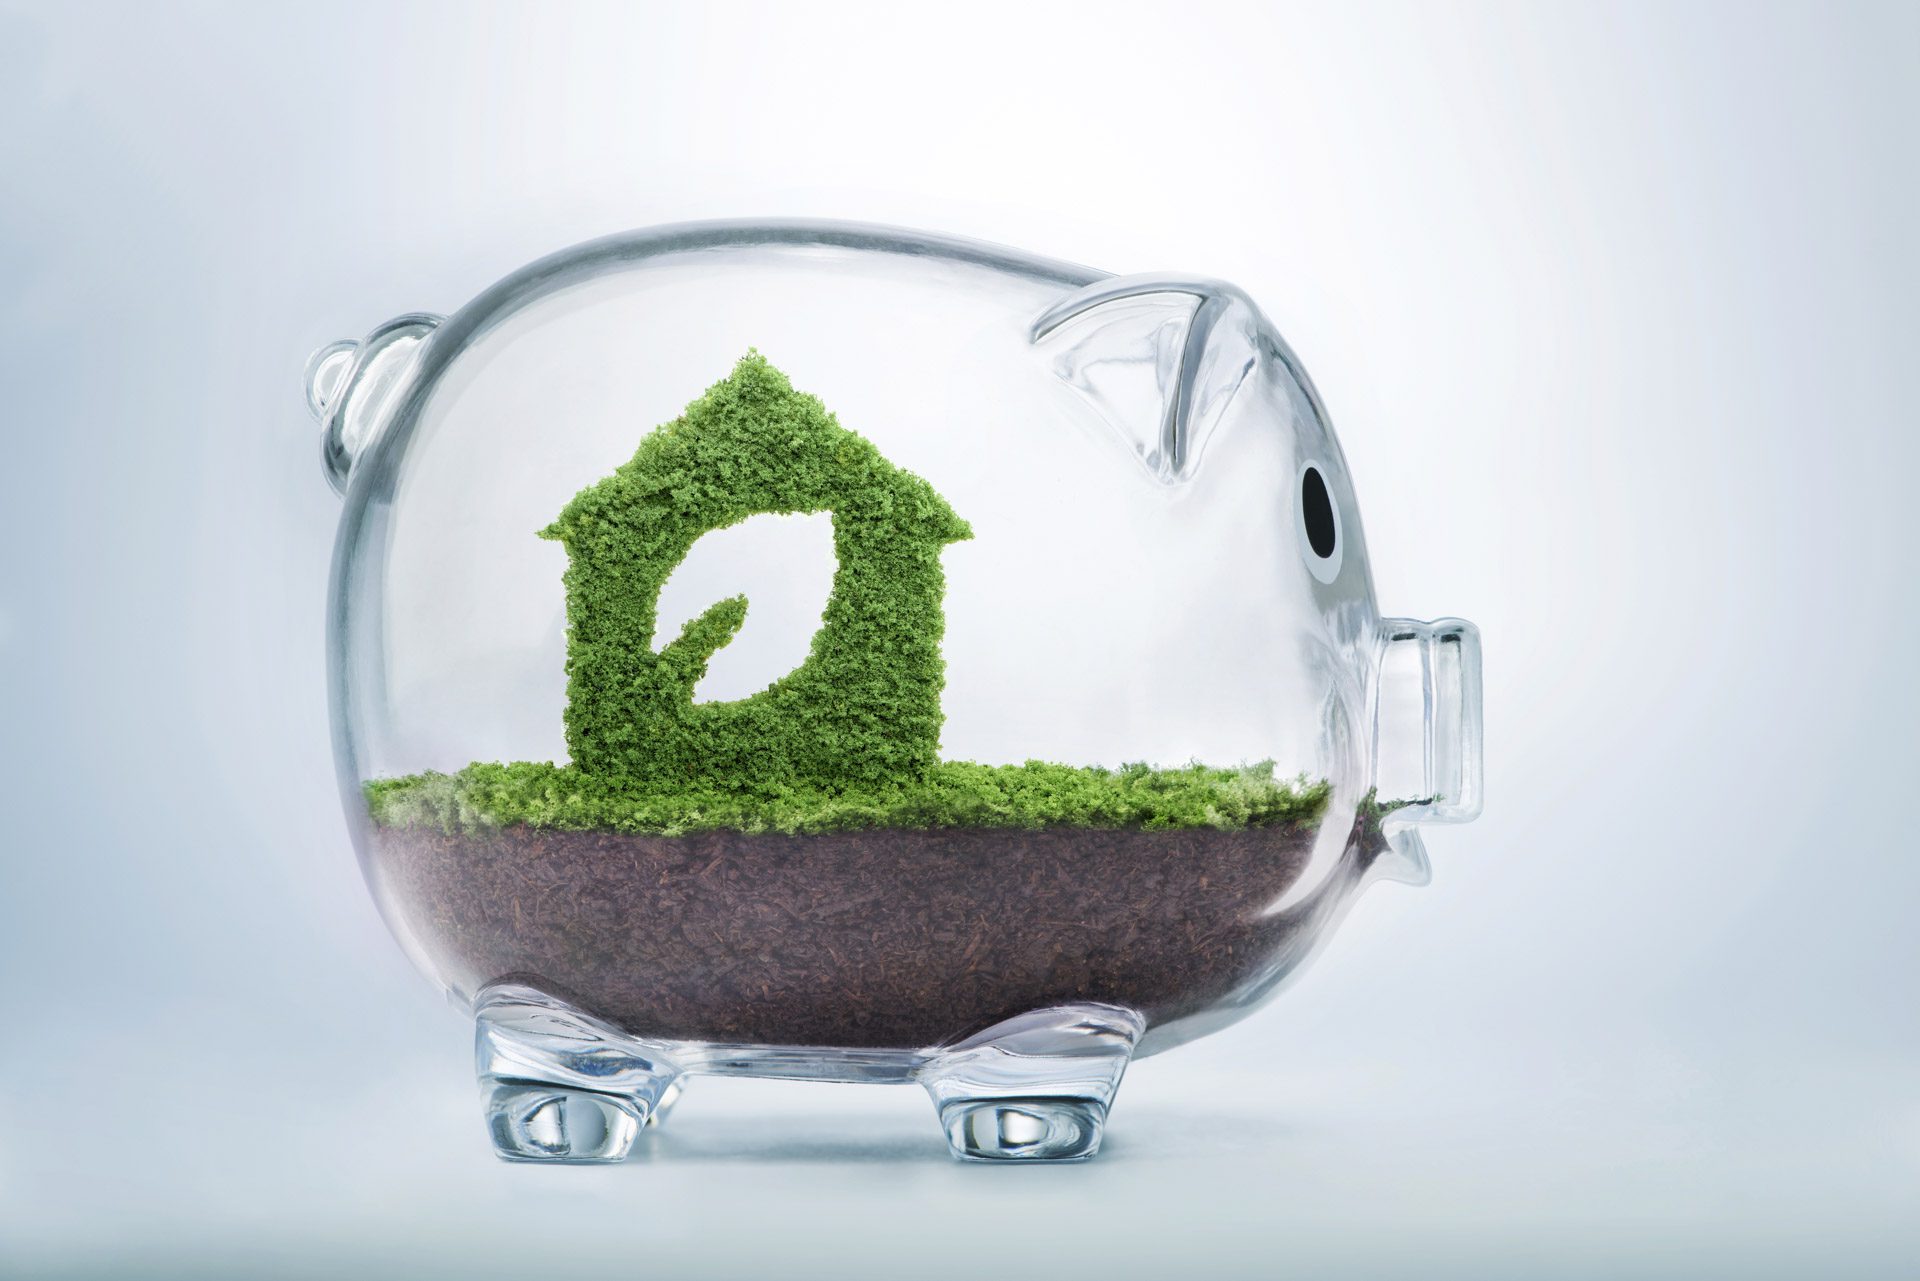 Nature is home concept. Grass growing in the shape of a house with a cut out leaf, inside a transparent piggy bank, symbolising the need to invest in sustainable homes, to protect the environment.